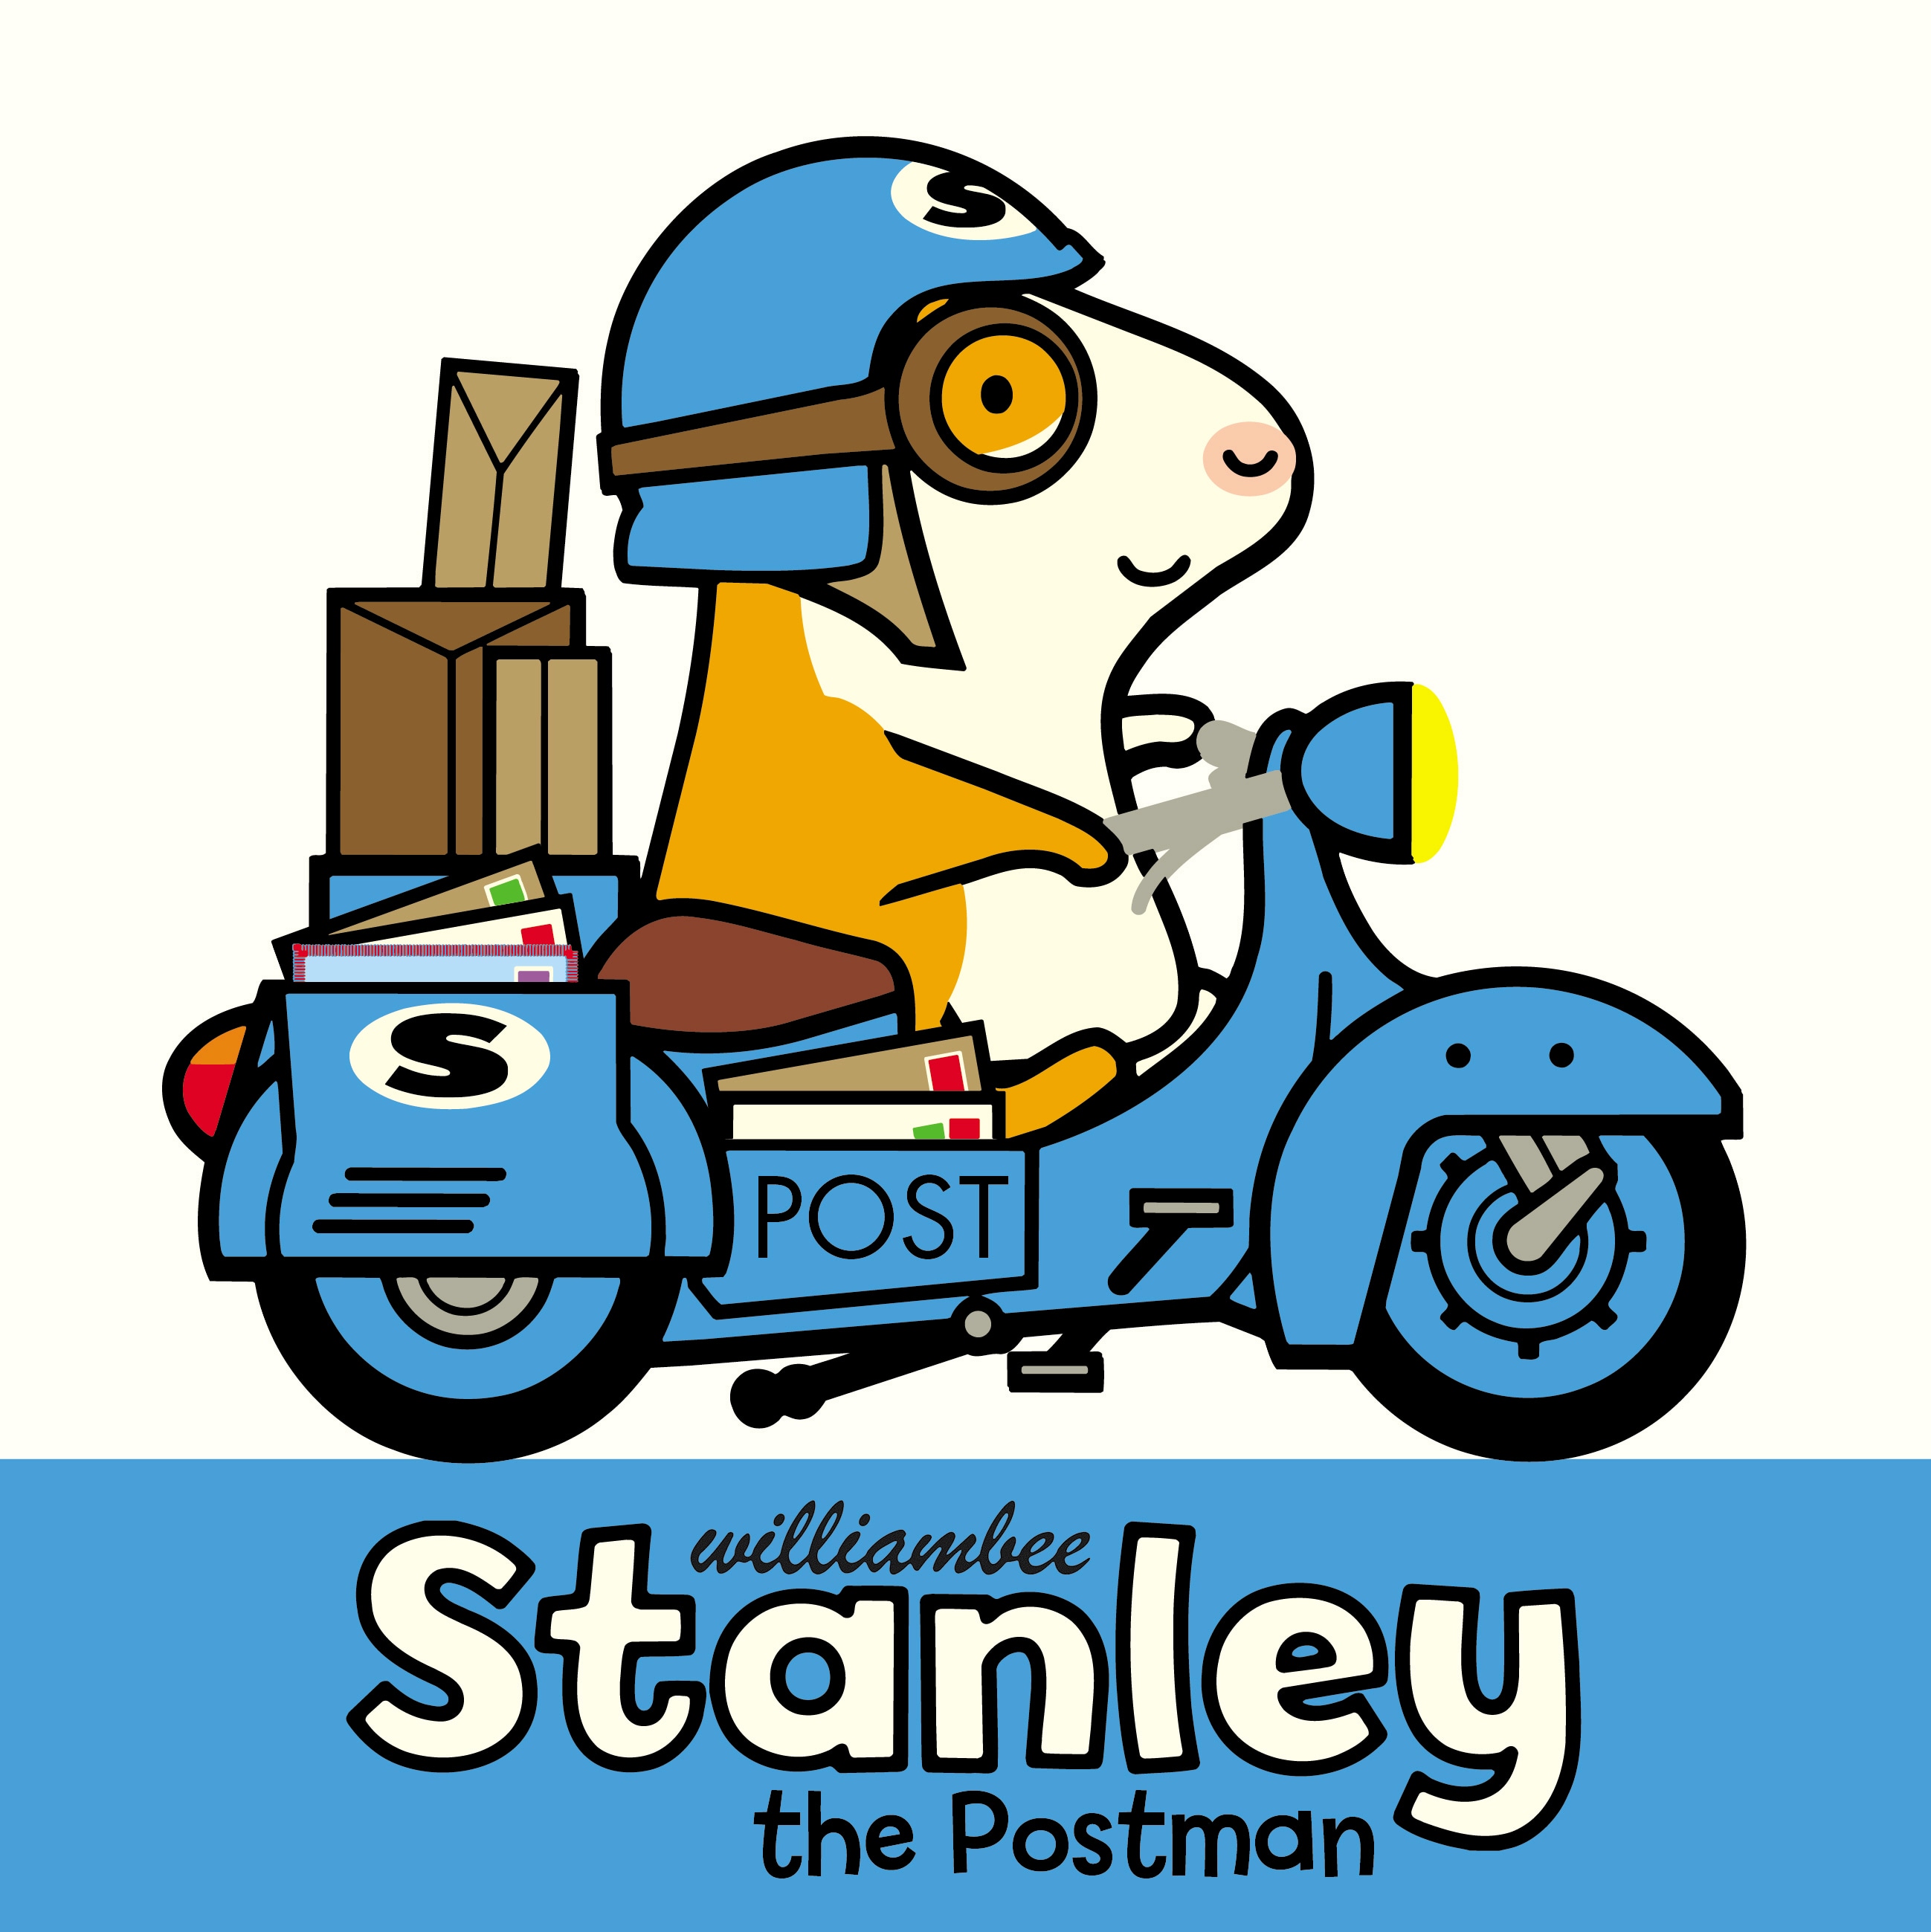 Book “Stanley the Postman” by William Bee, Sue Buswell — February 21, 2019